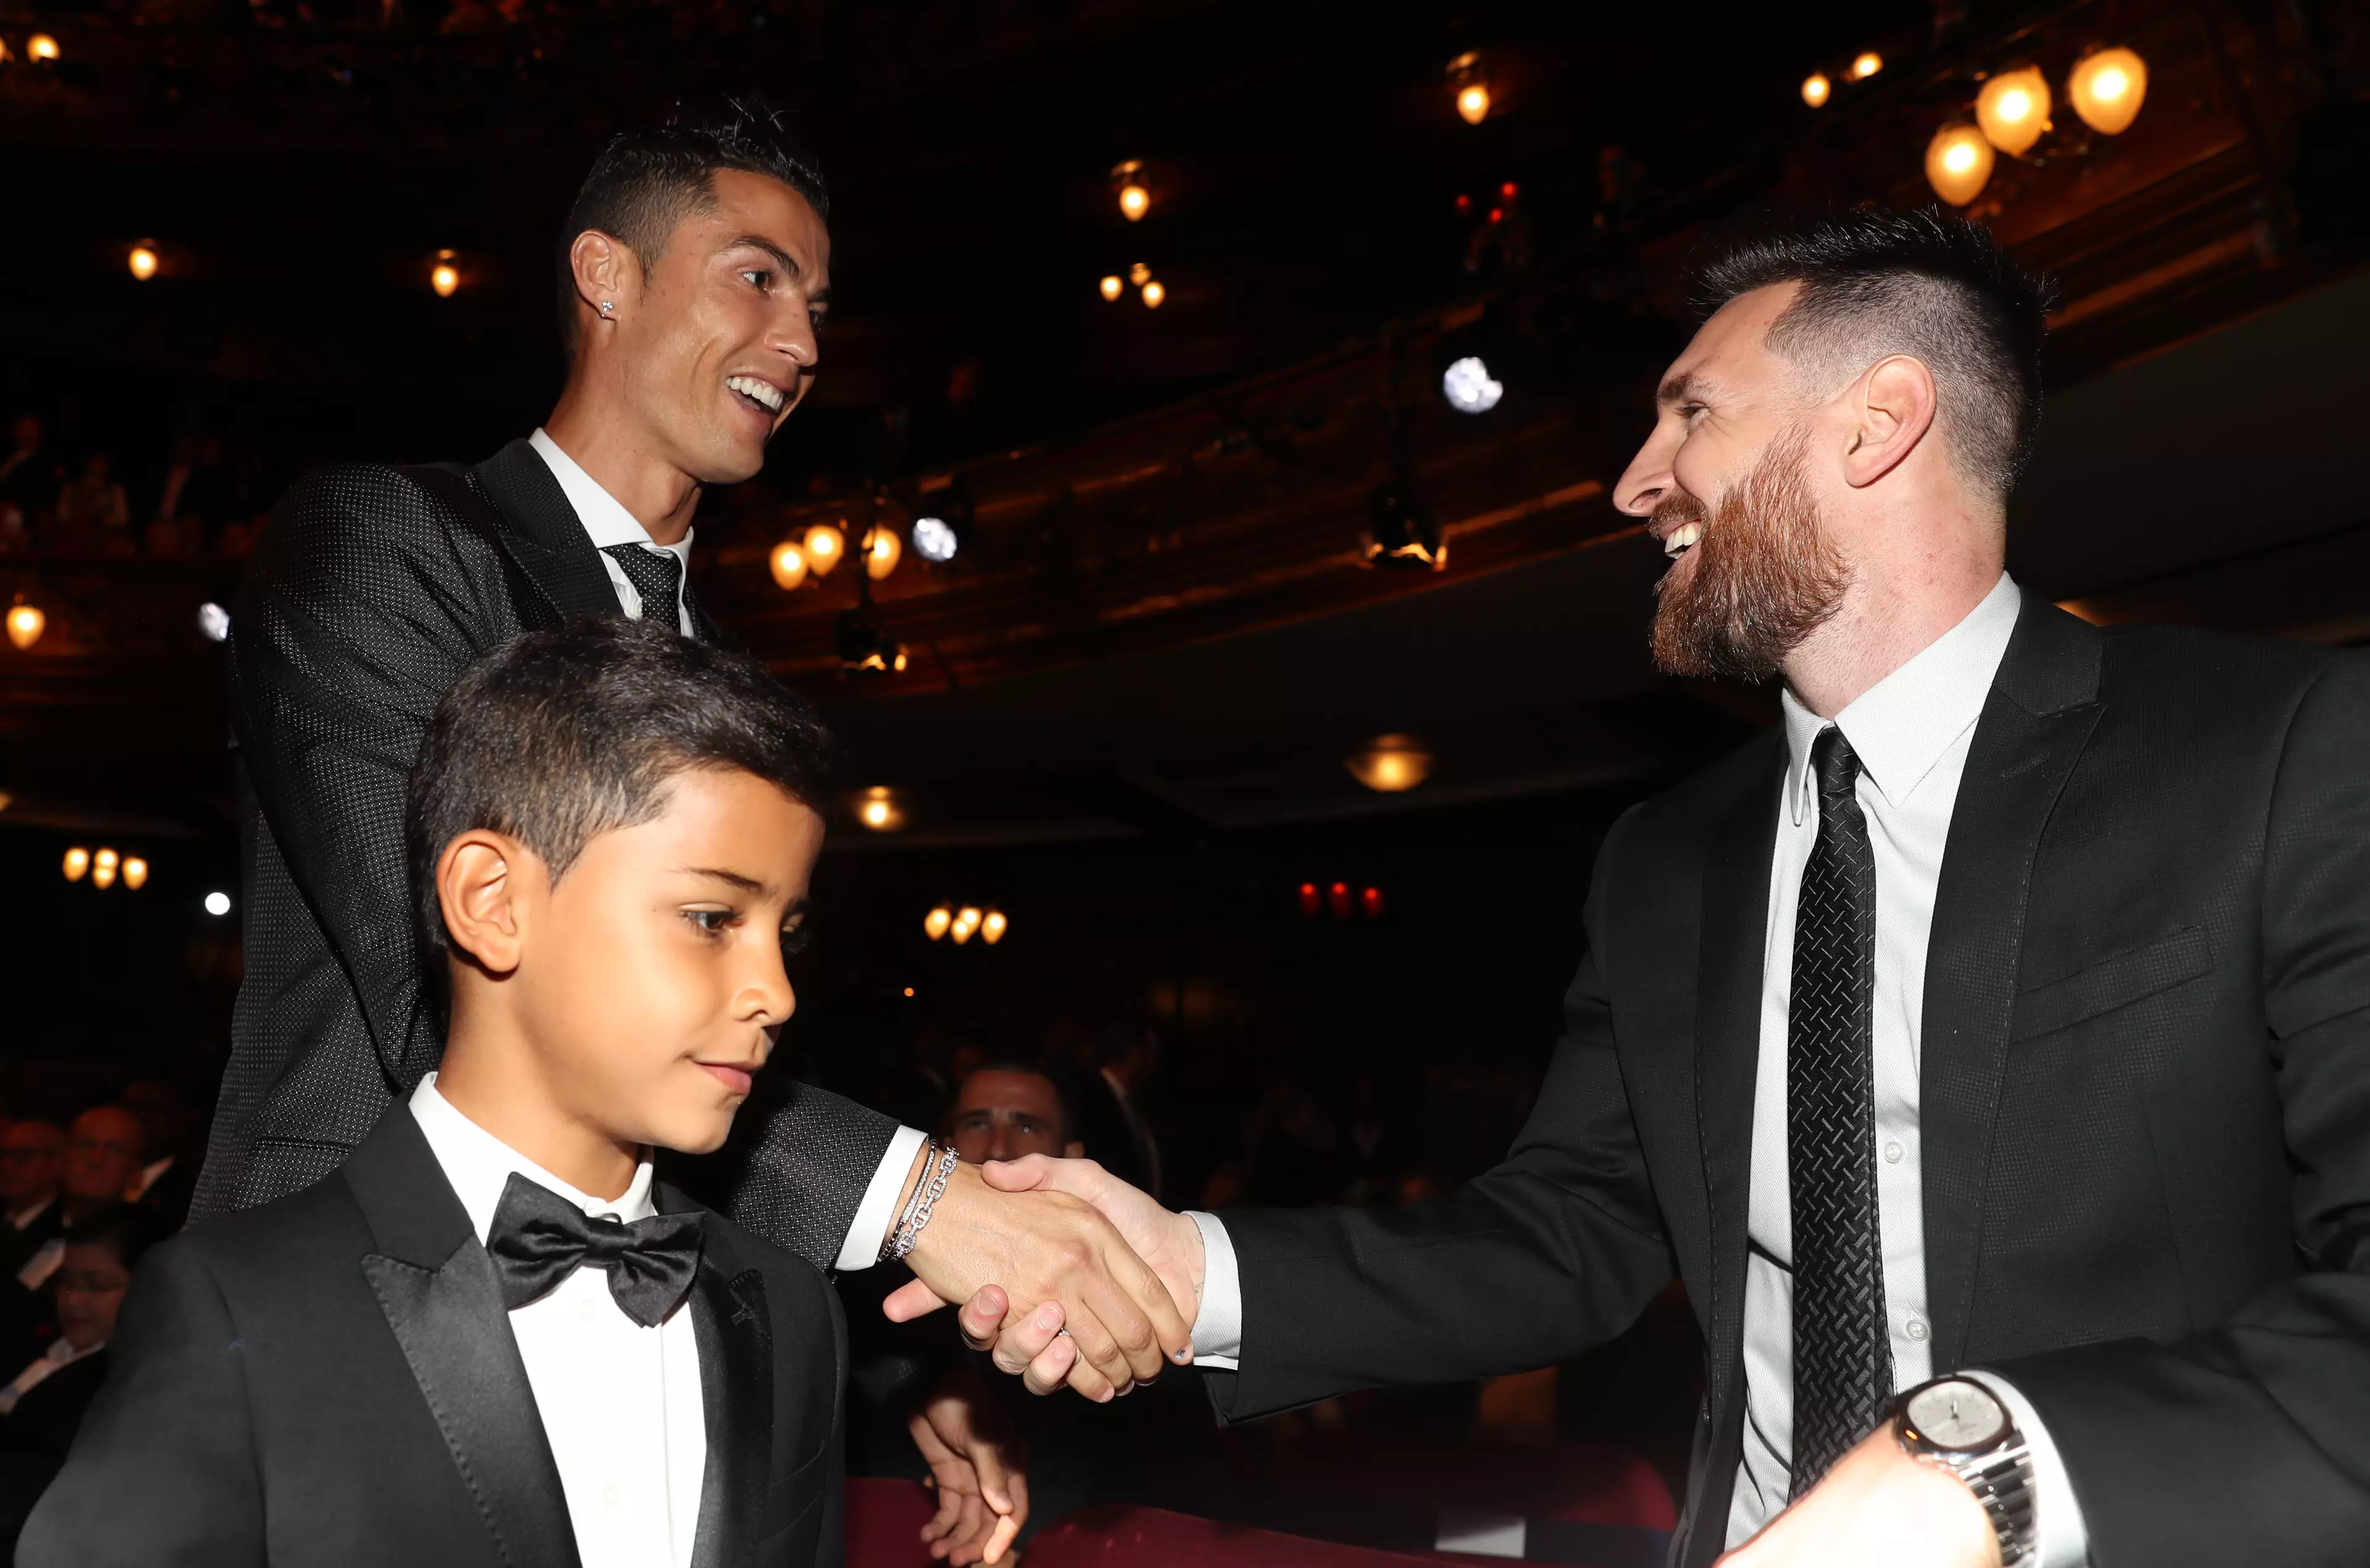 Ronaldo and Messi aren't going to be teammates after all. Image: PA Images